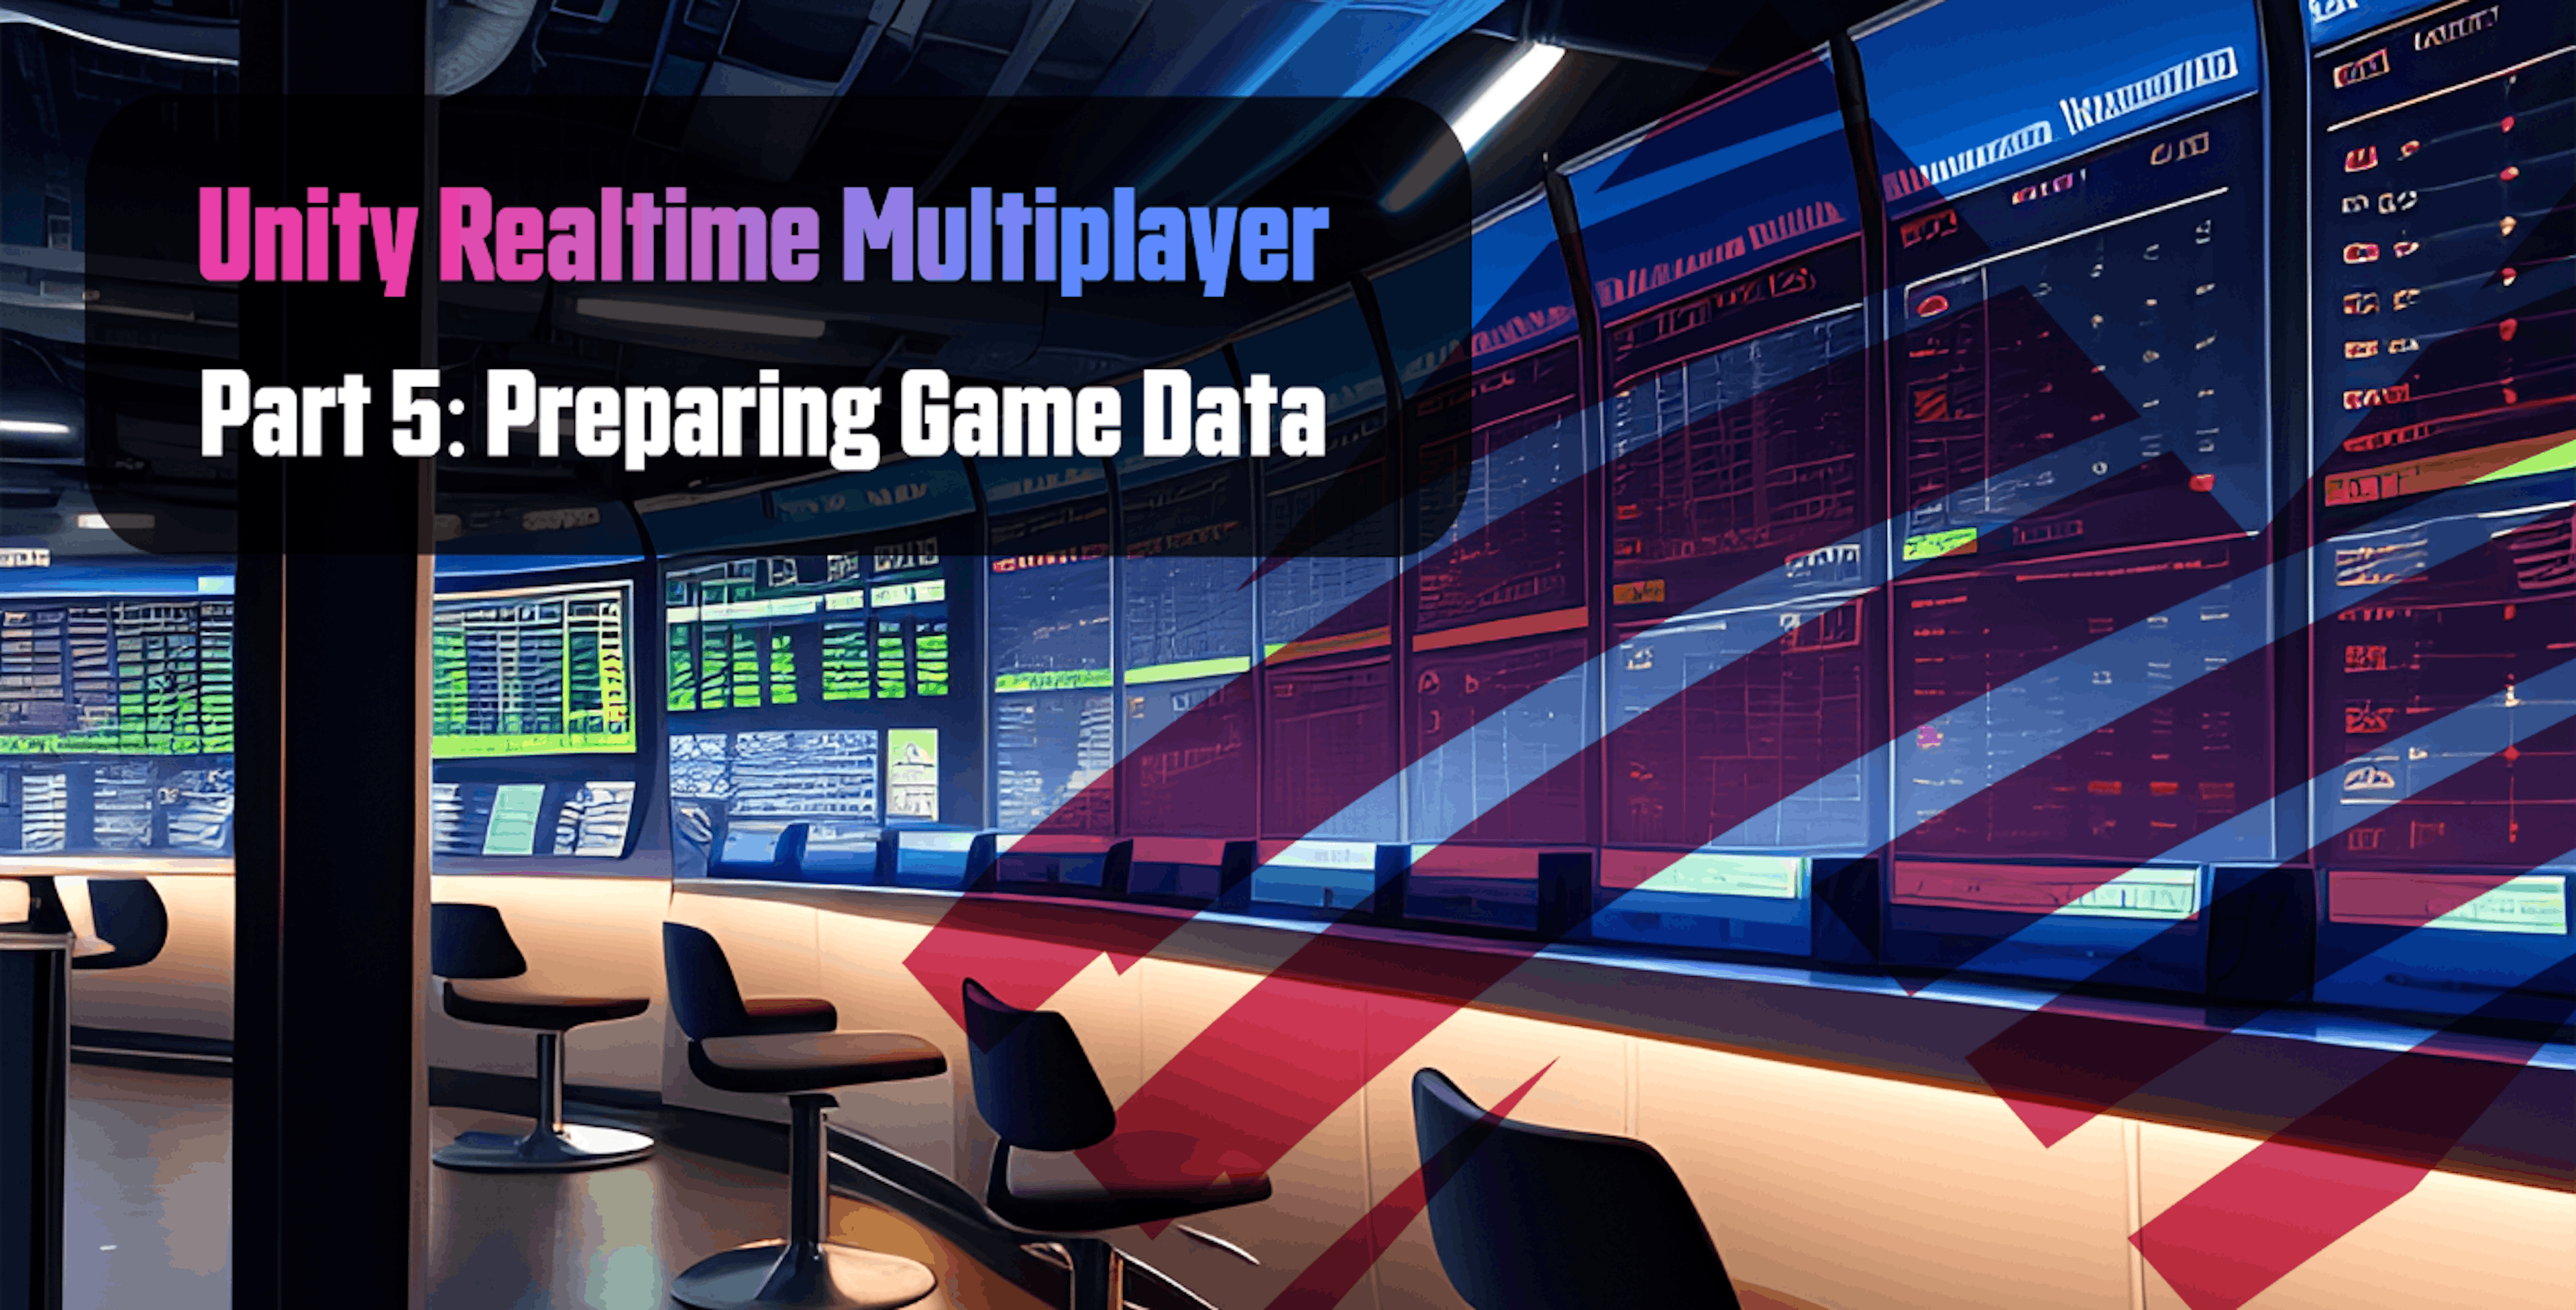 featured image - Unity Realtime Multiplayer, Part 5: Preparing Game Data